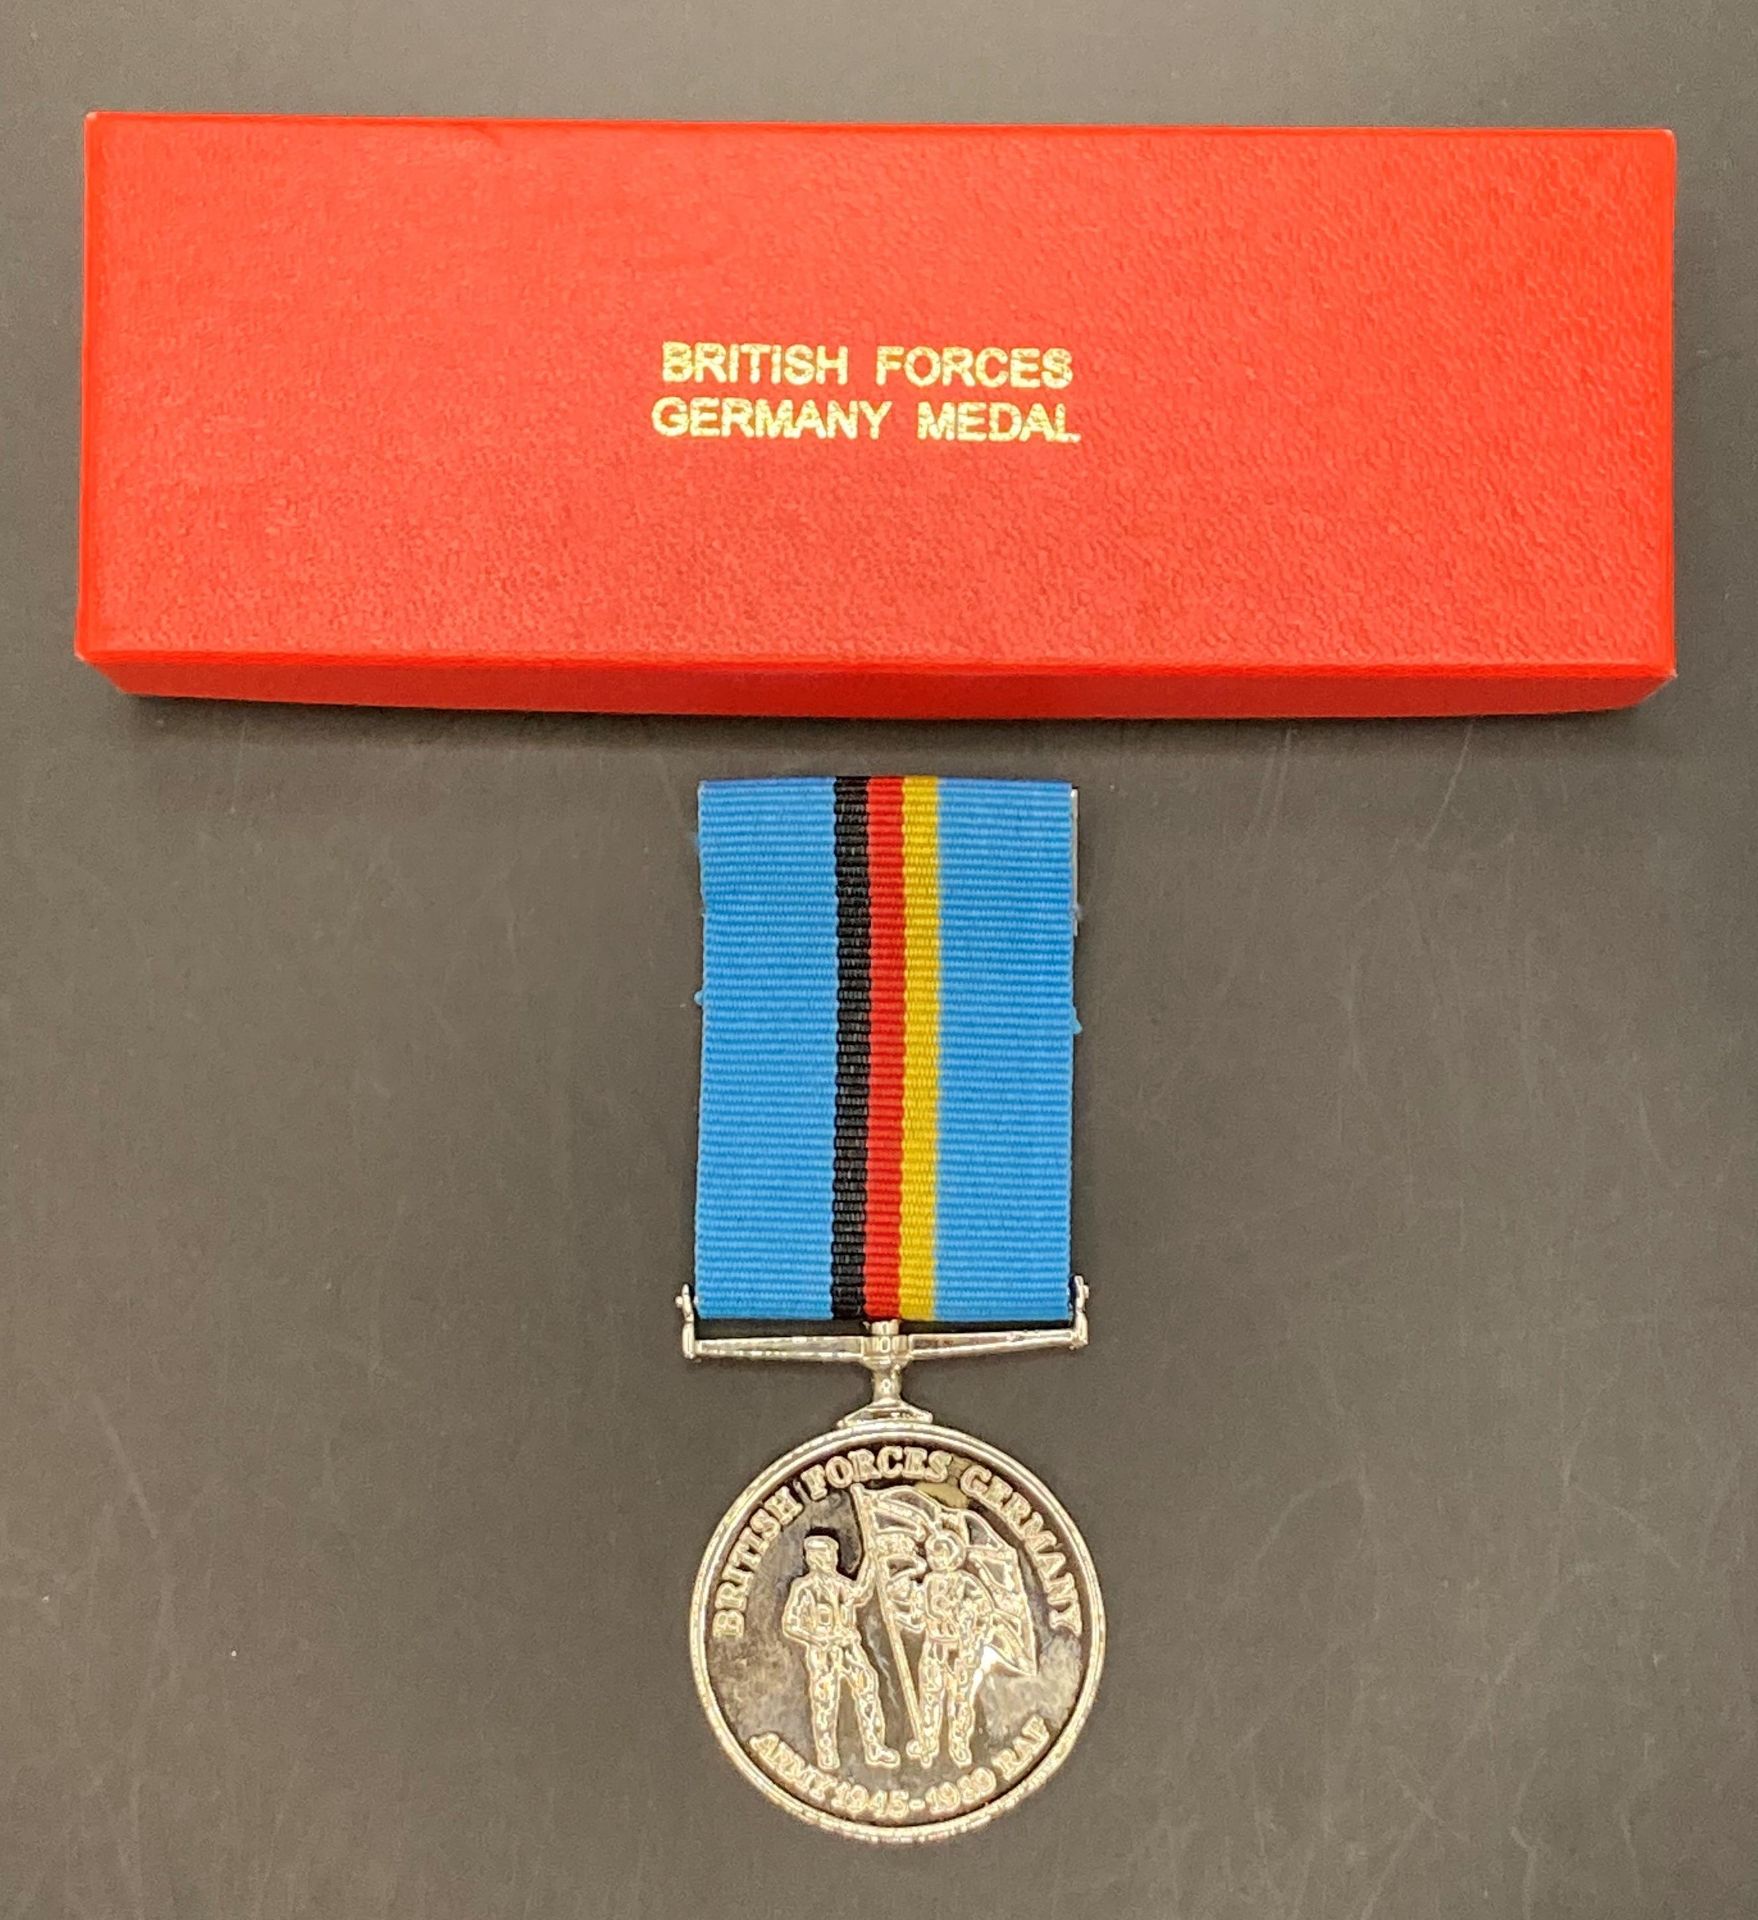 British Forces Germany Medal named to LT C.H. WHISTLER 1945-1946 RNVR in box of issue.